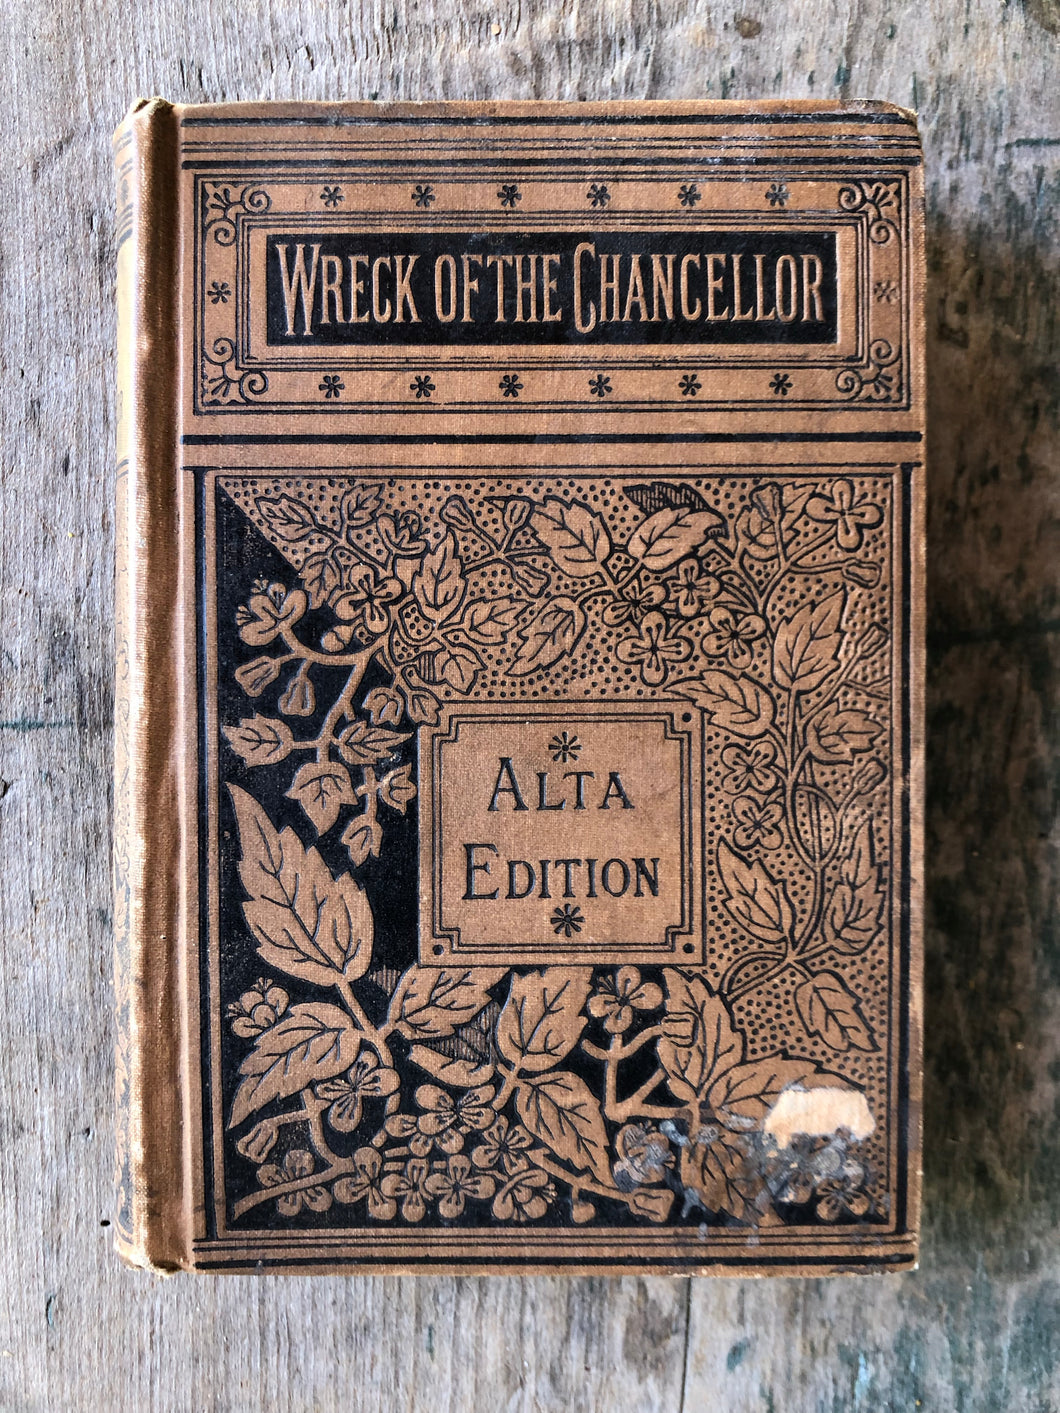 The Wreck of the Chancellor. Diary of J. R. Kazallon, Passenger. By Jules Verne